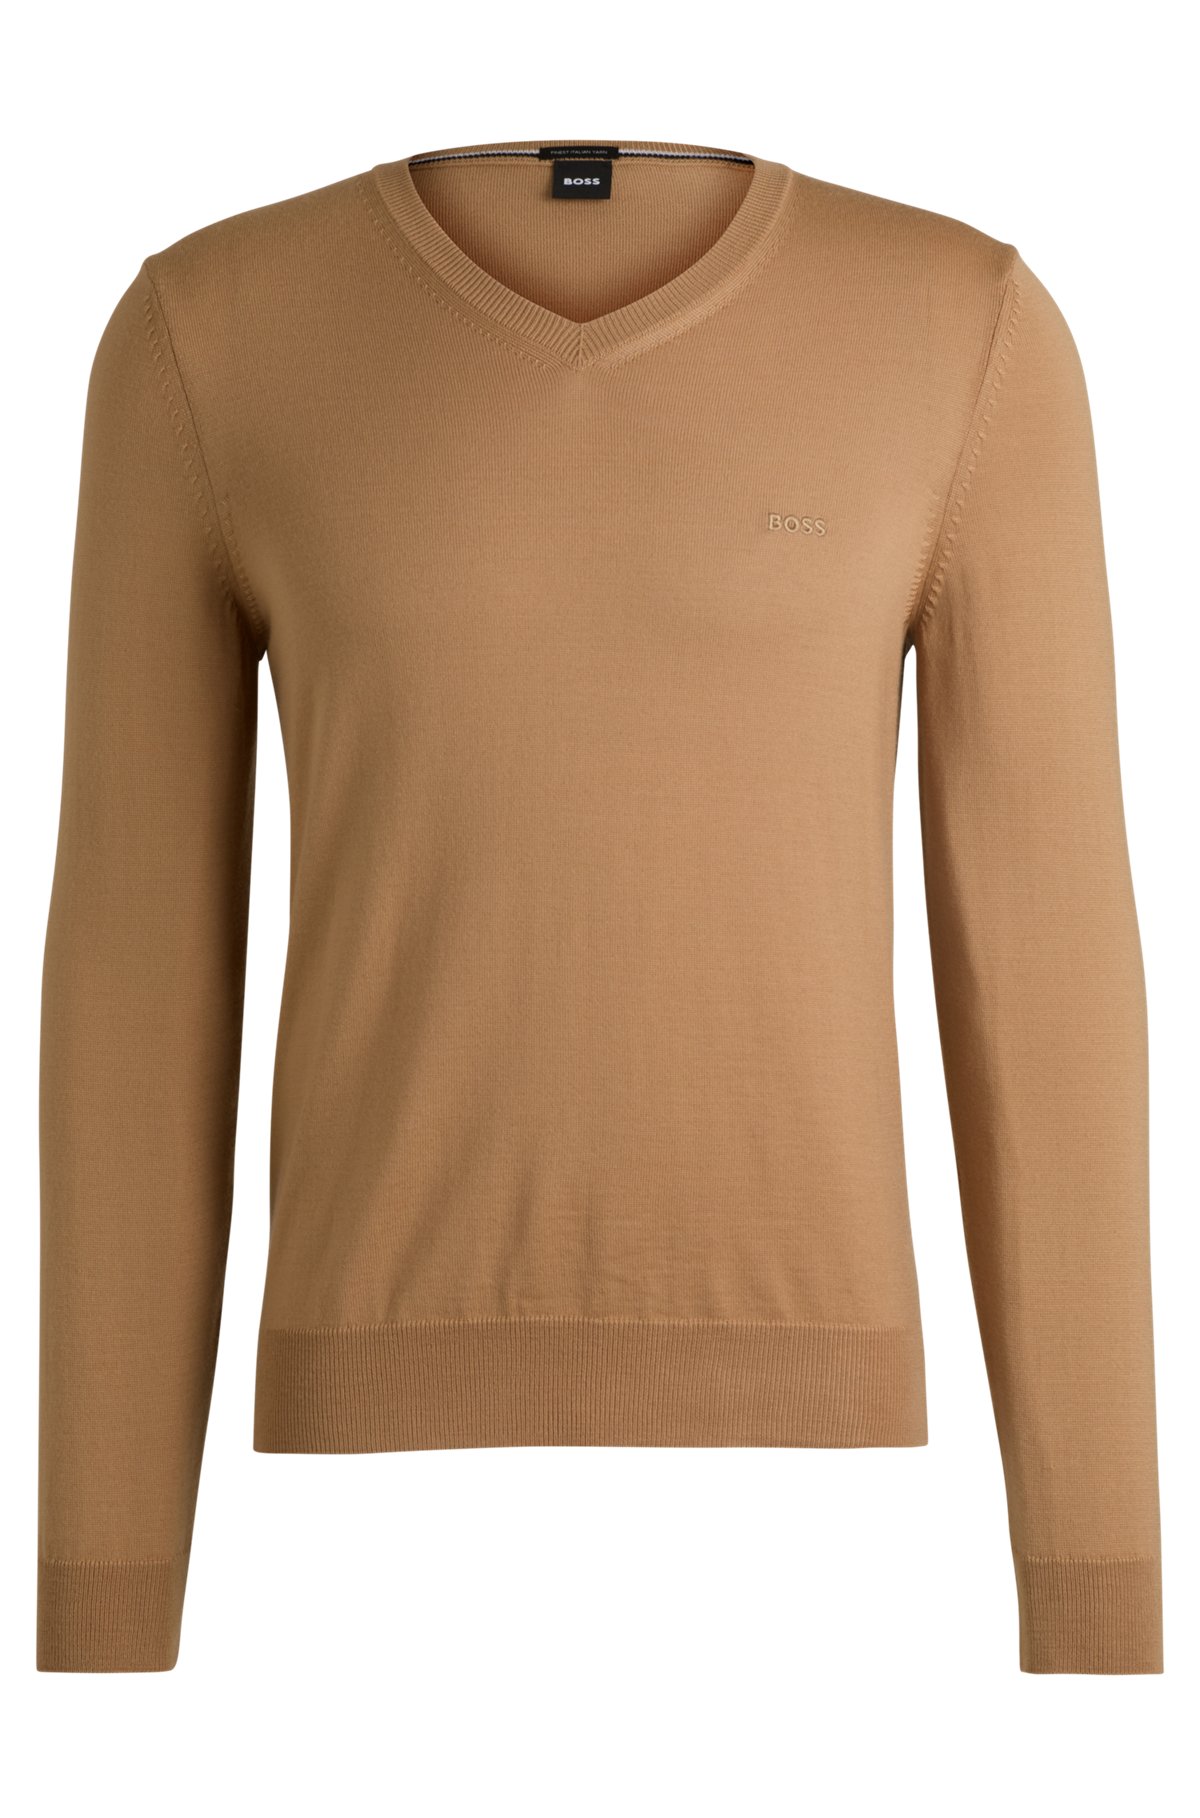  V-neck sweater in responsible wool, Beige